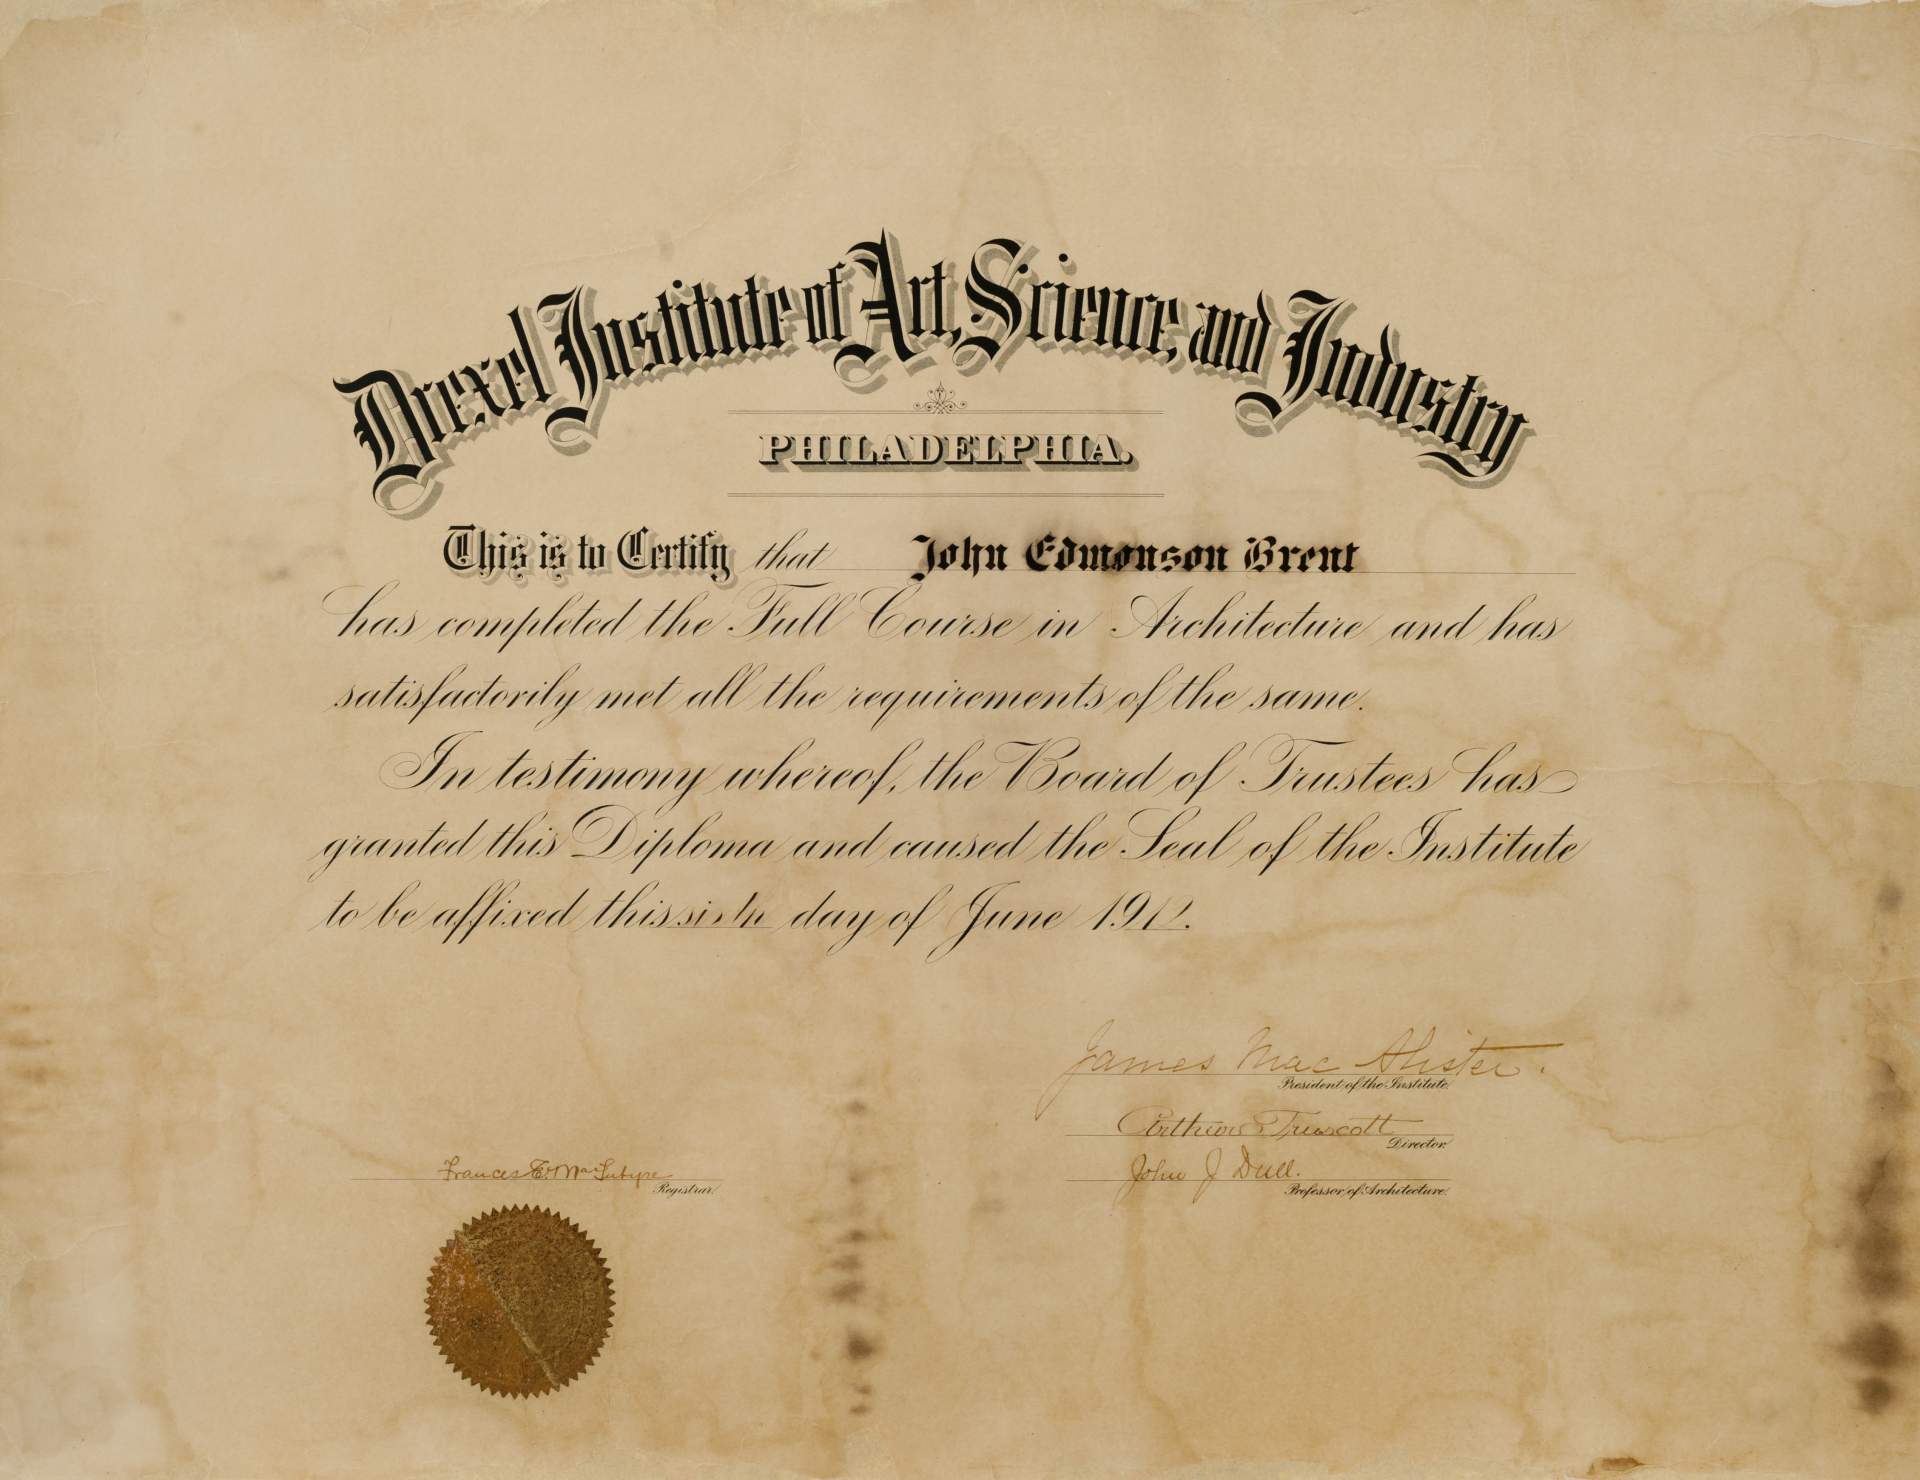 Drexel Institute of Art, Science and Industry diploma